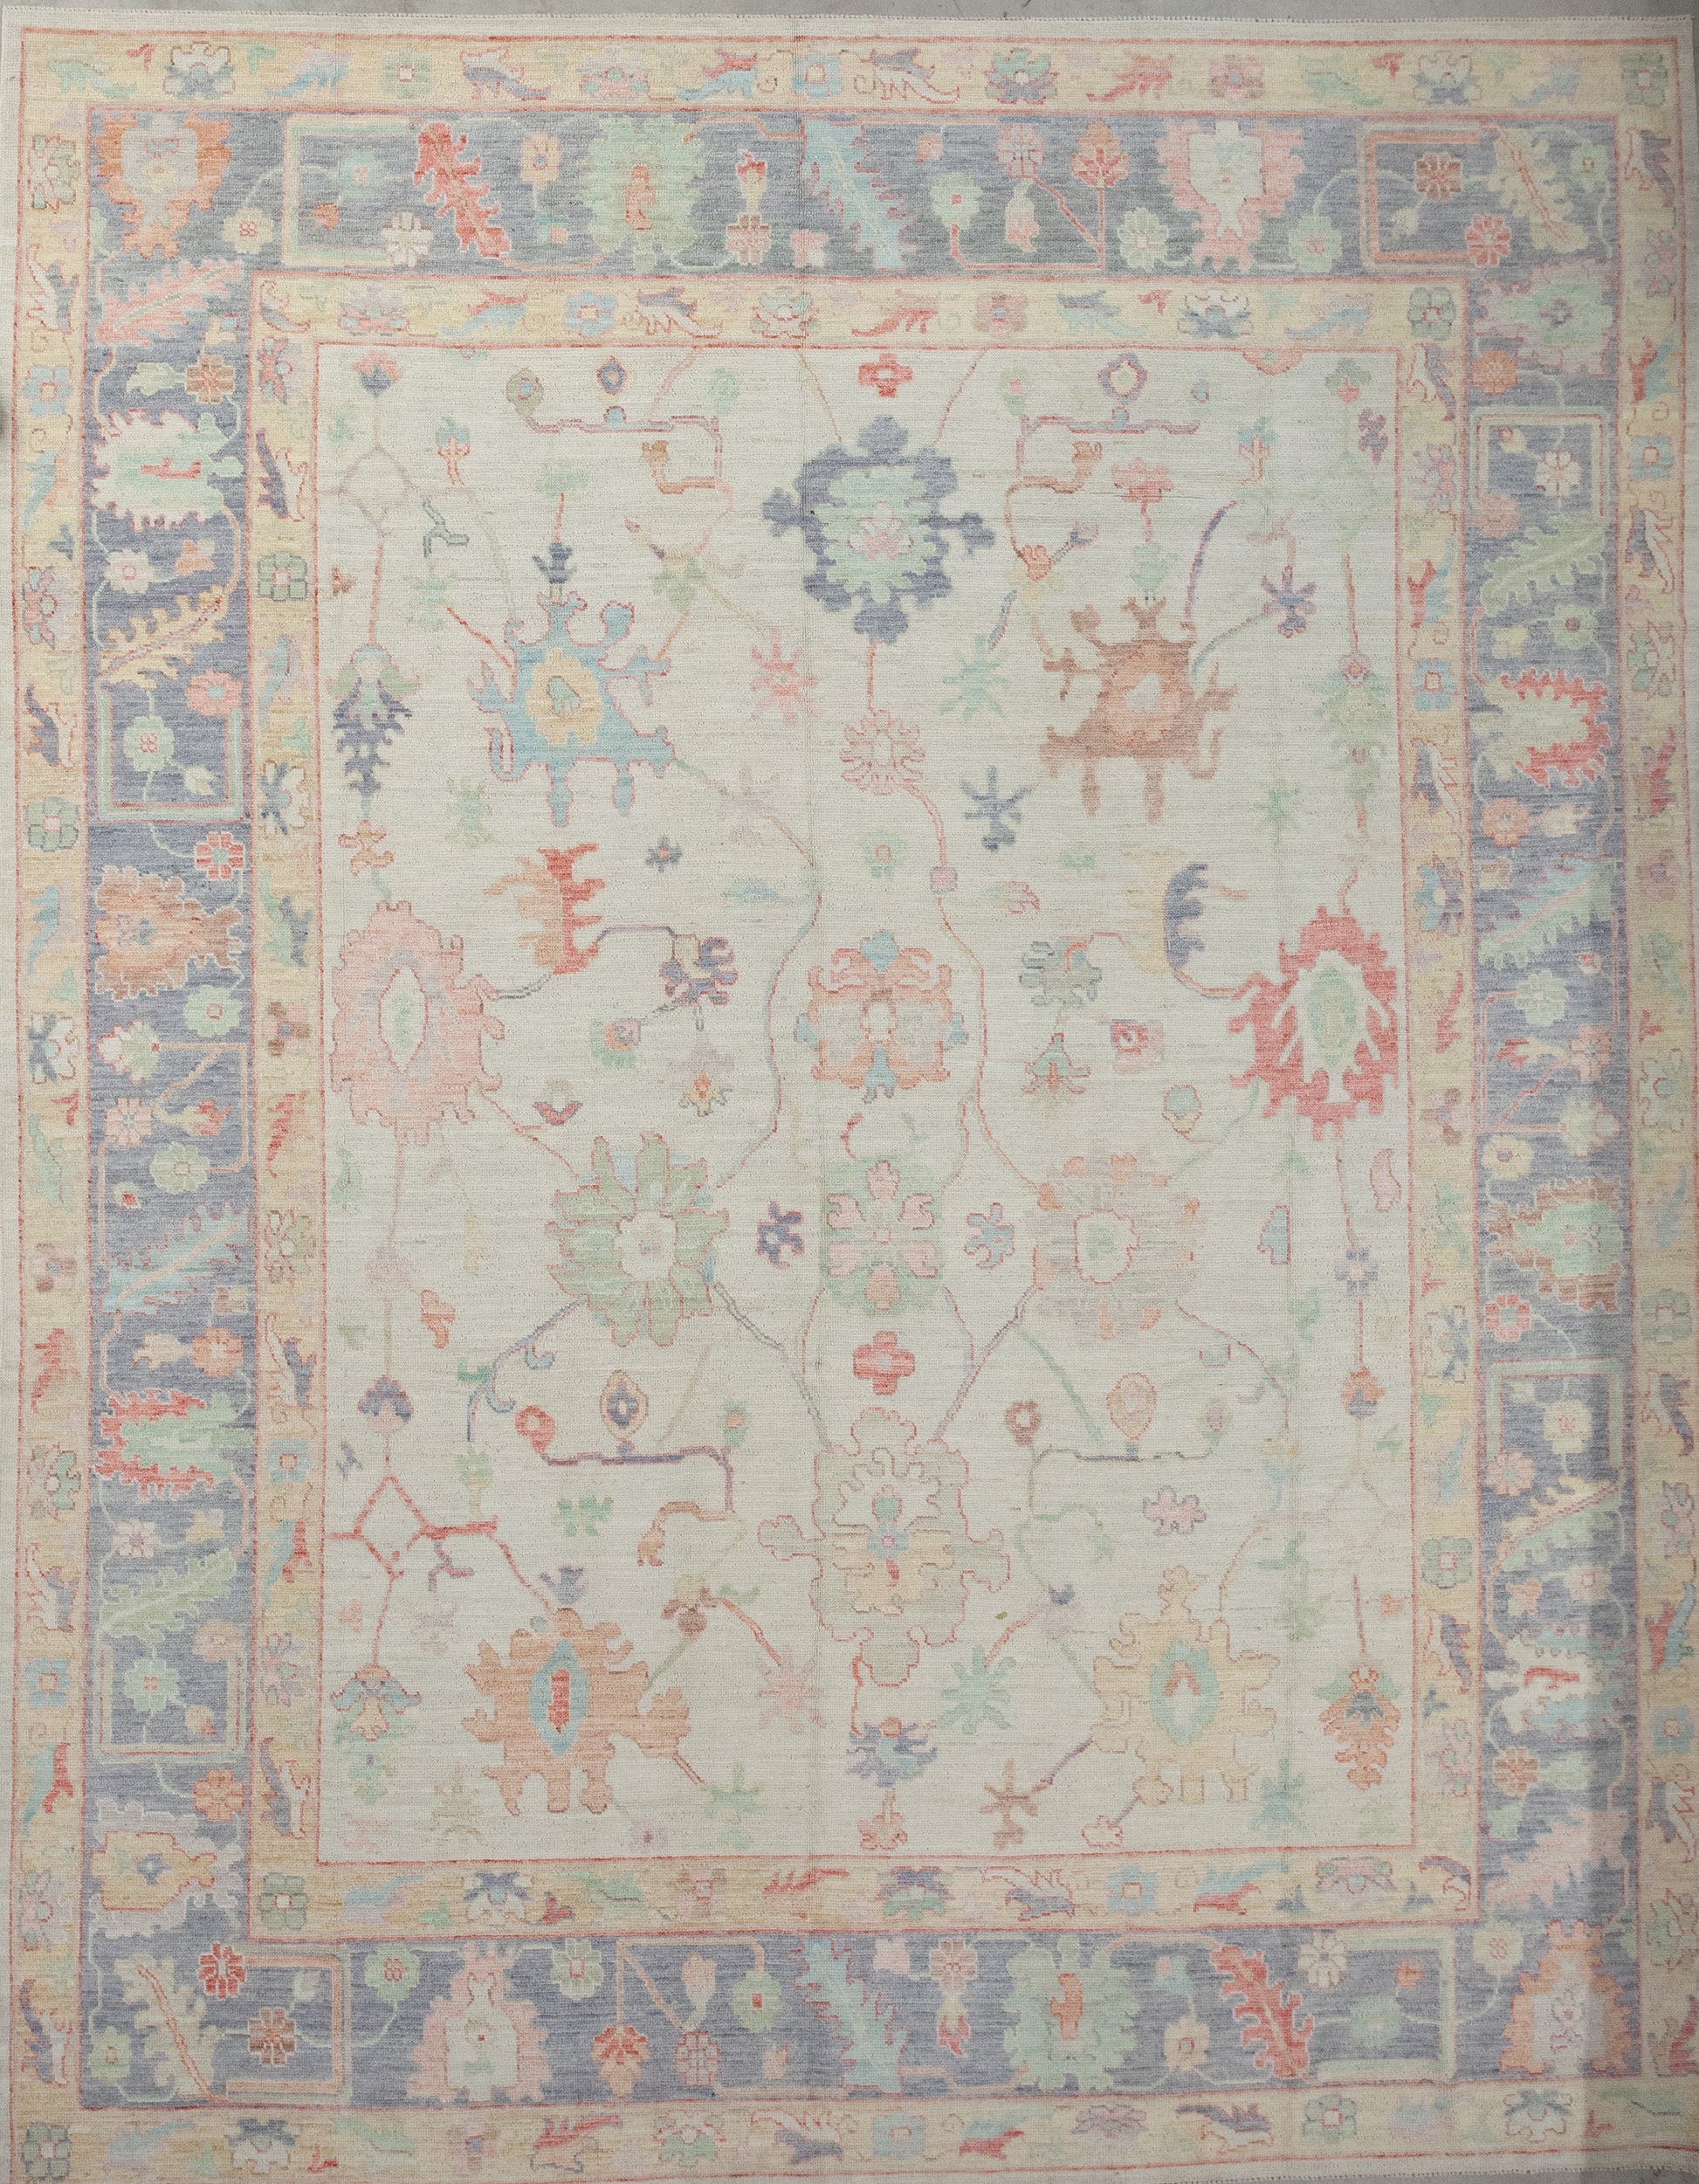 The tasteful carpet was woven with beige as the dominant color which evokes healing and protection feelings for your environment. Also, the design features a composition made of peonies' flowers in green, orange, blue, pink, and red.